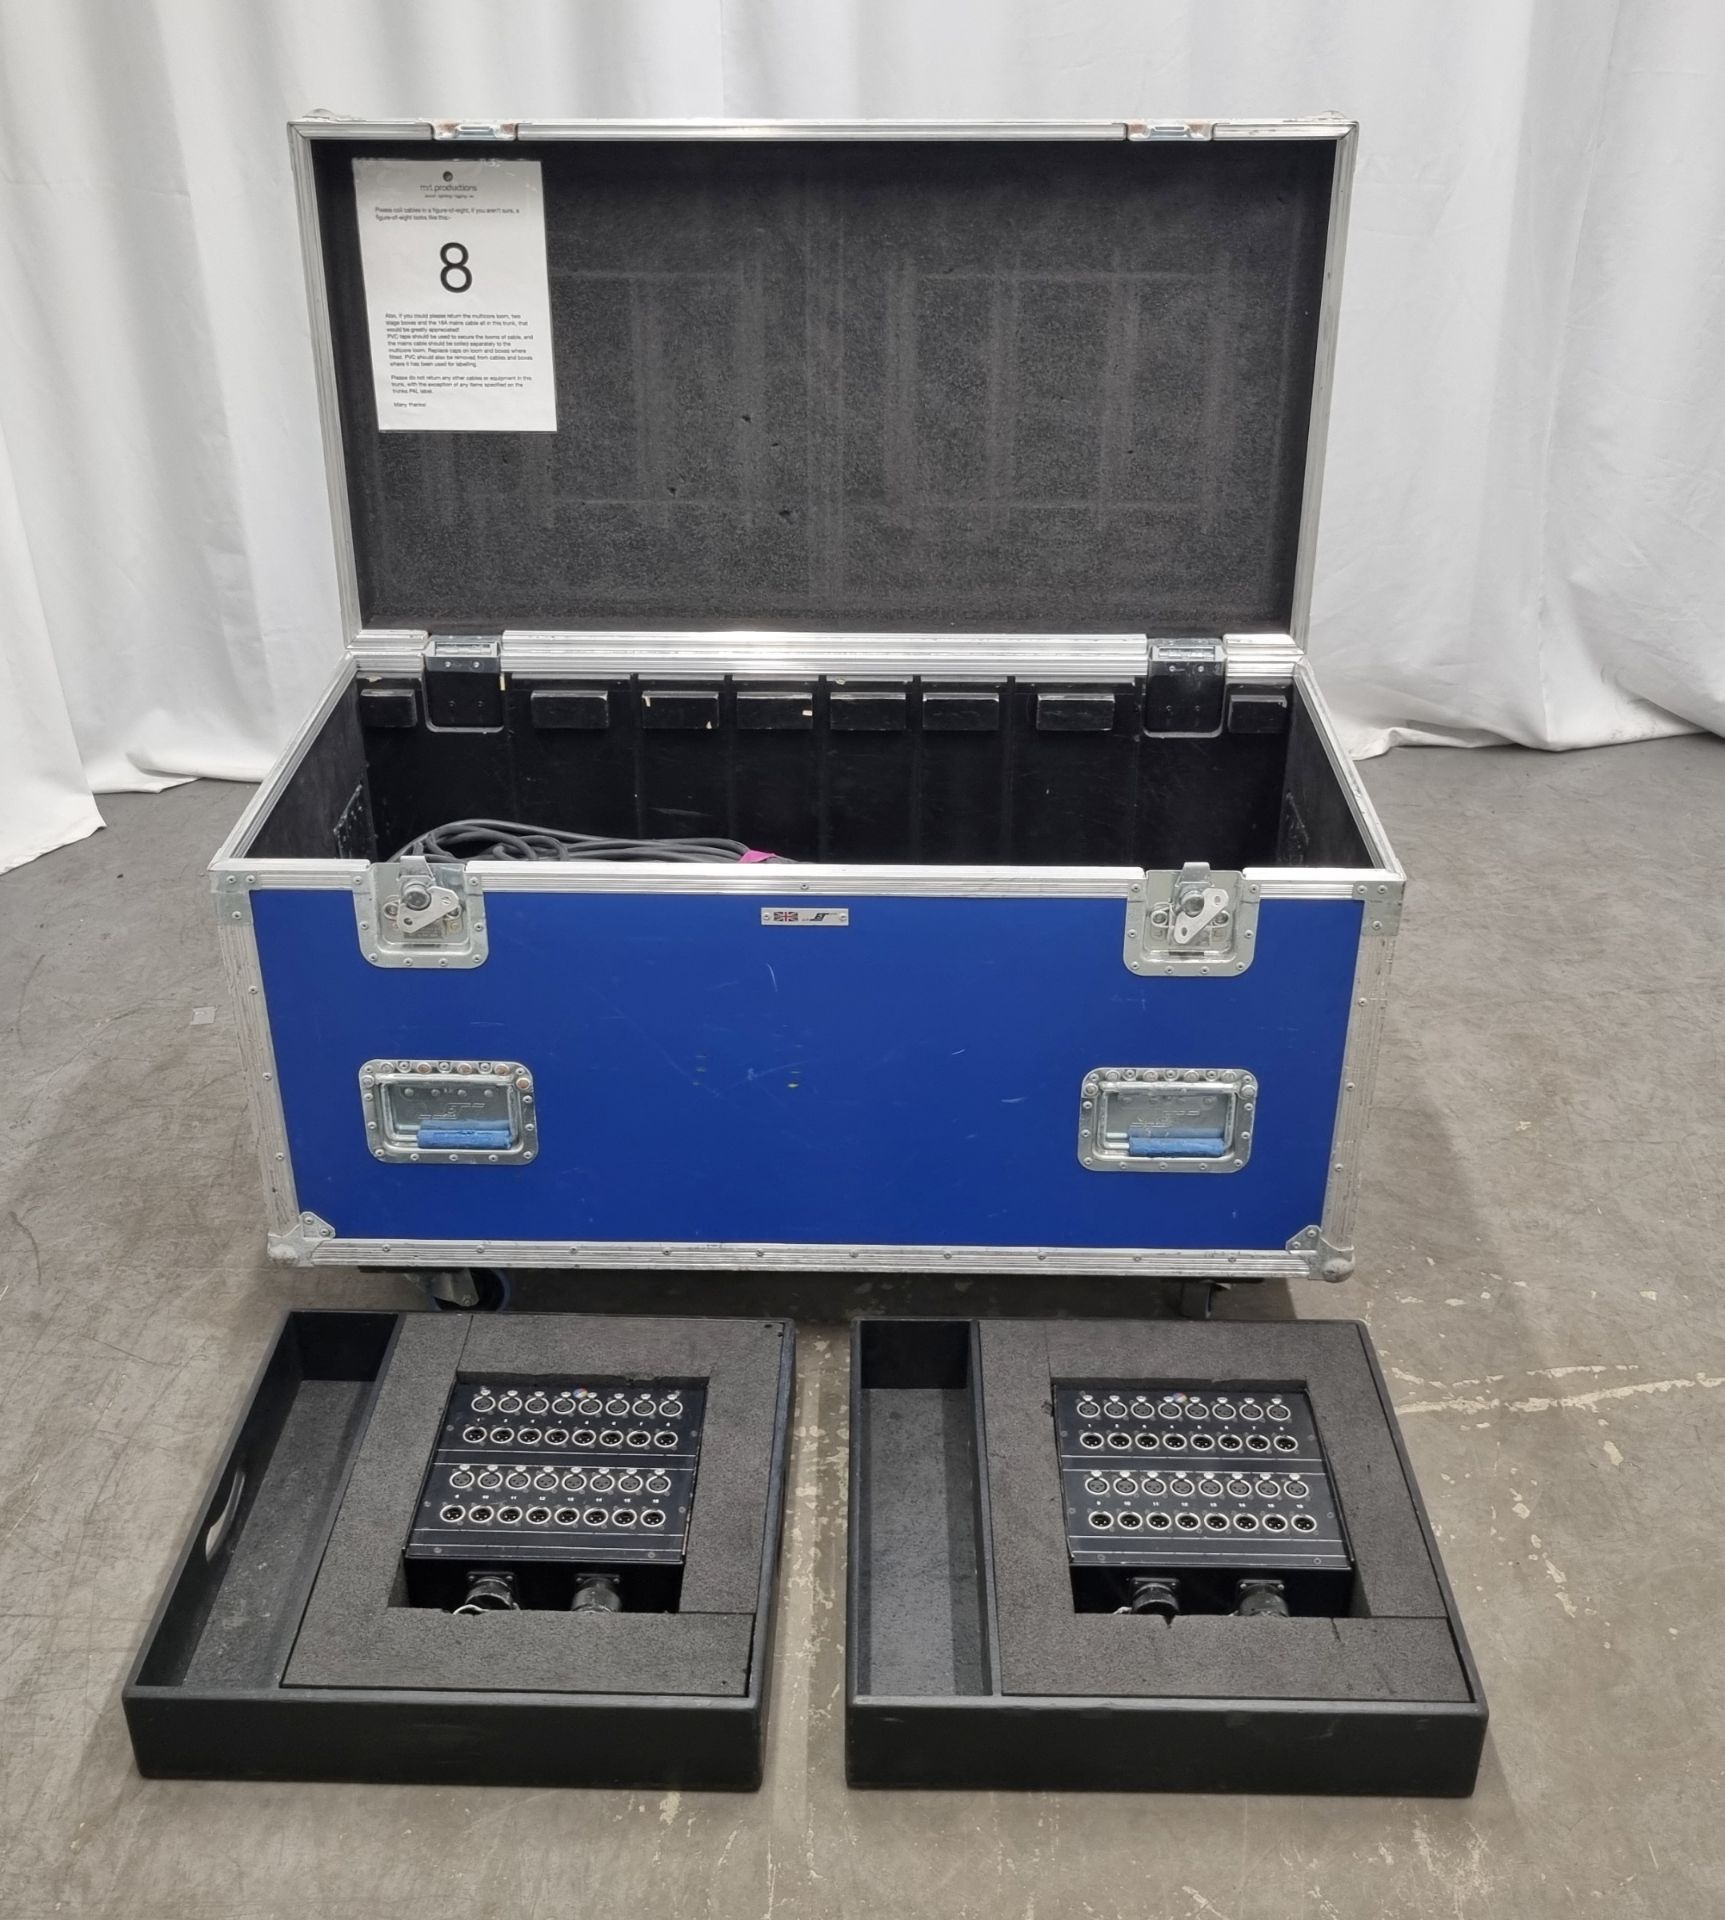 2x 16 input and output XLR stageboxes with multicore loom and mains cable in flight case on wheels - Image 4 of 8